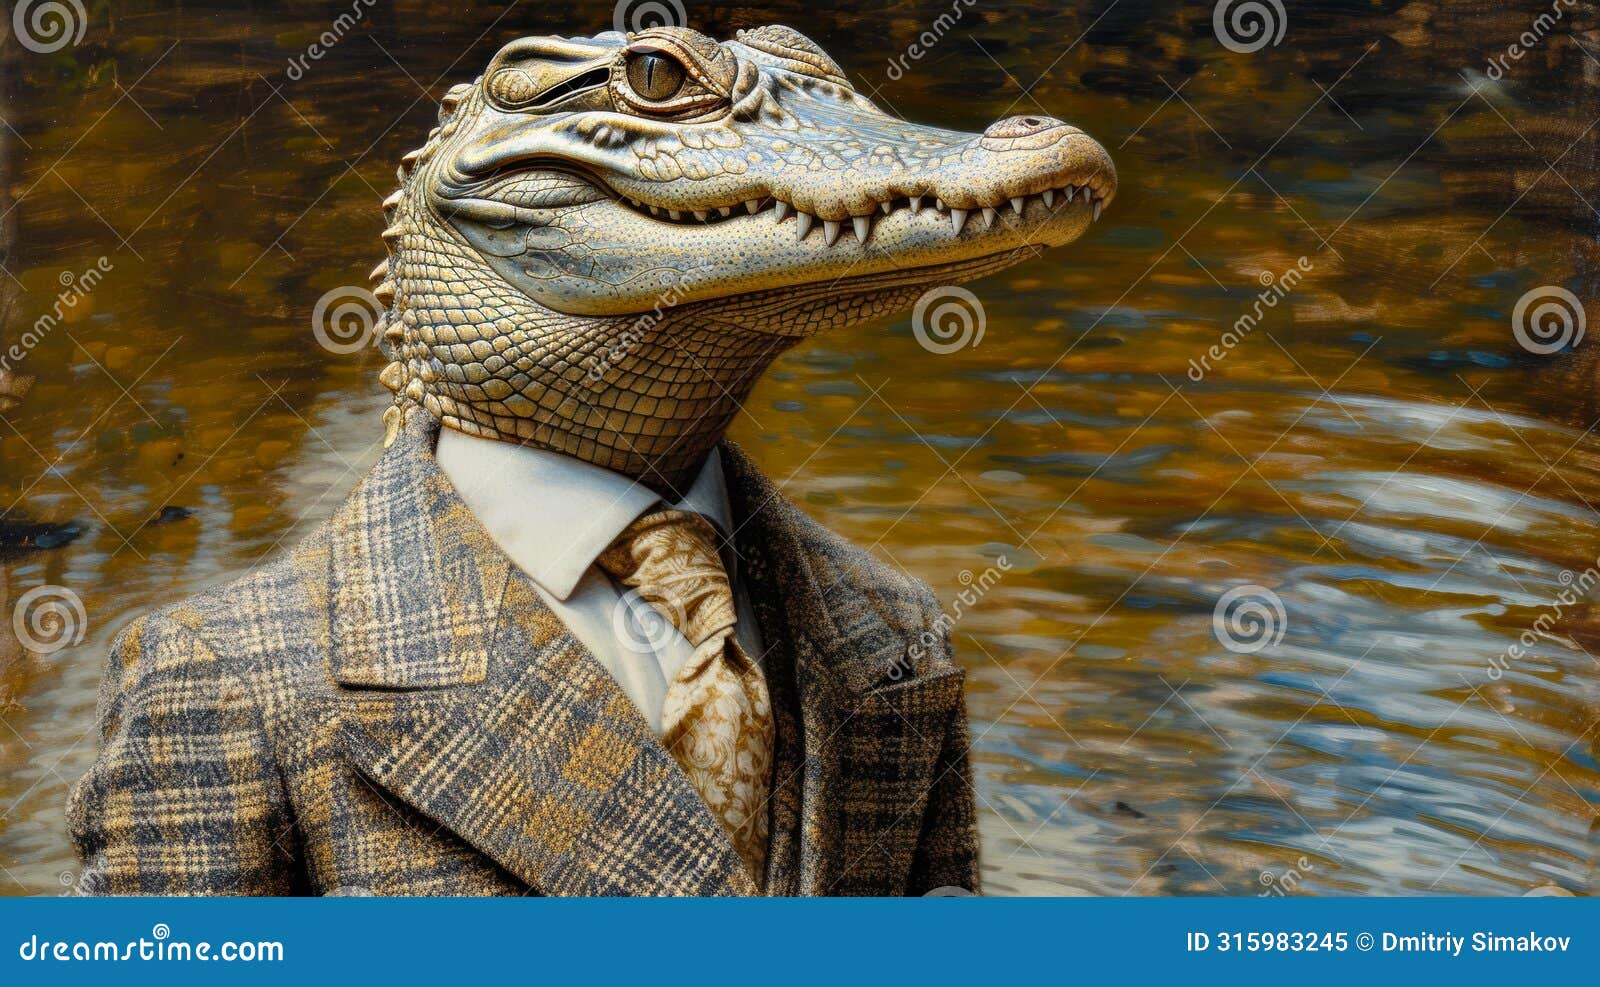 couture crocodile in a tailored suit